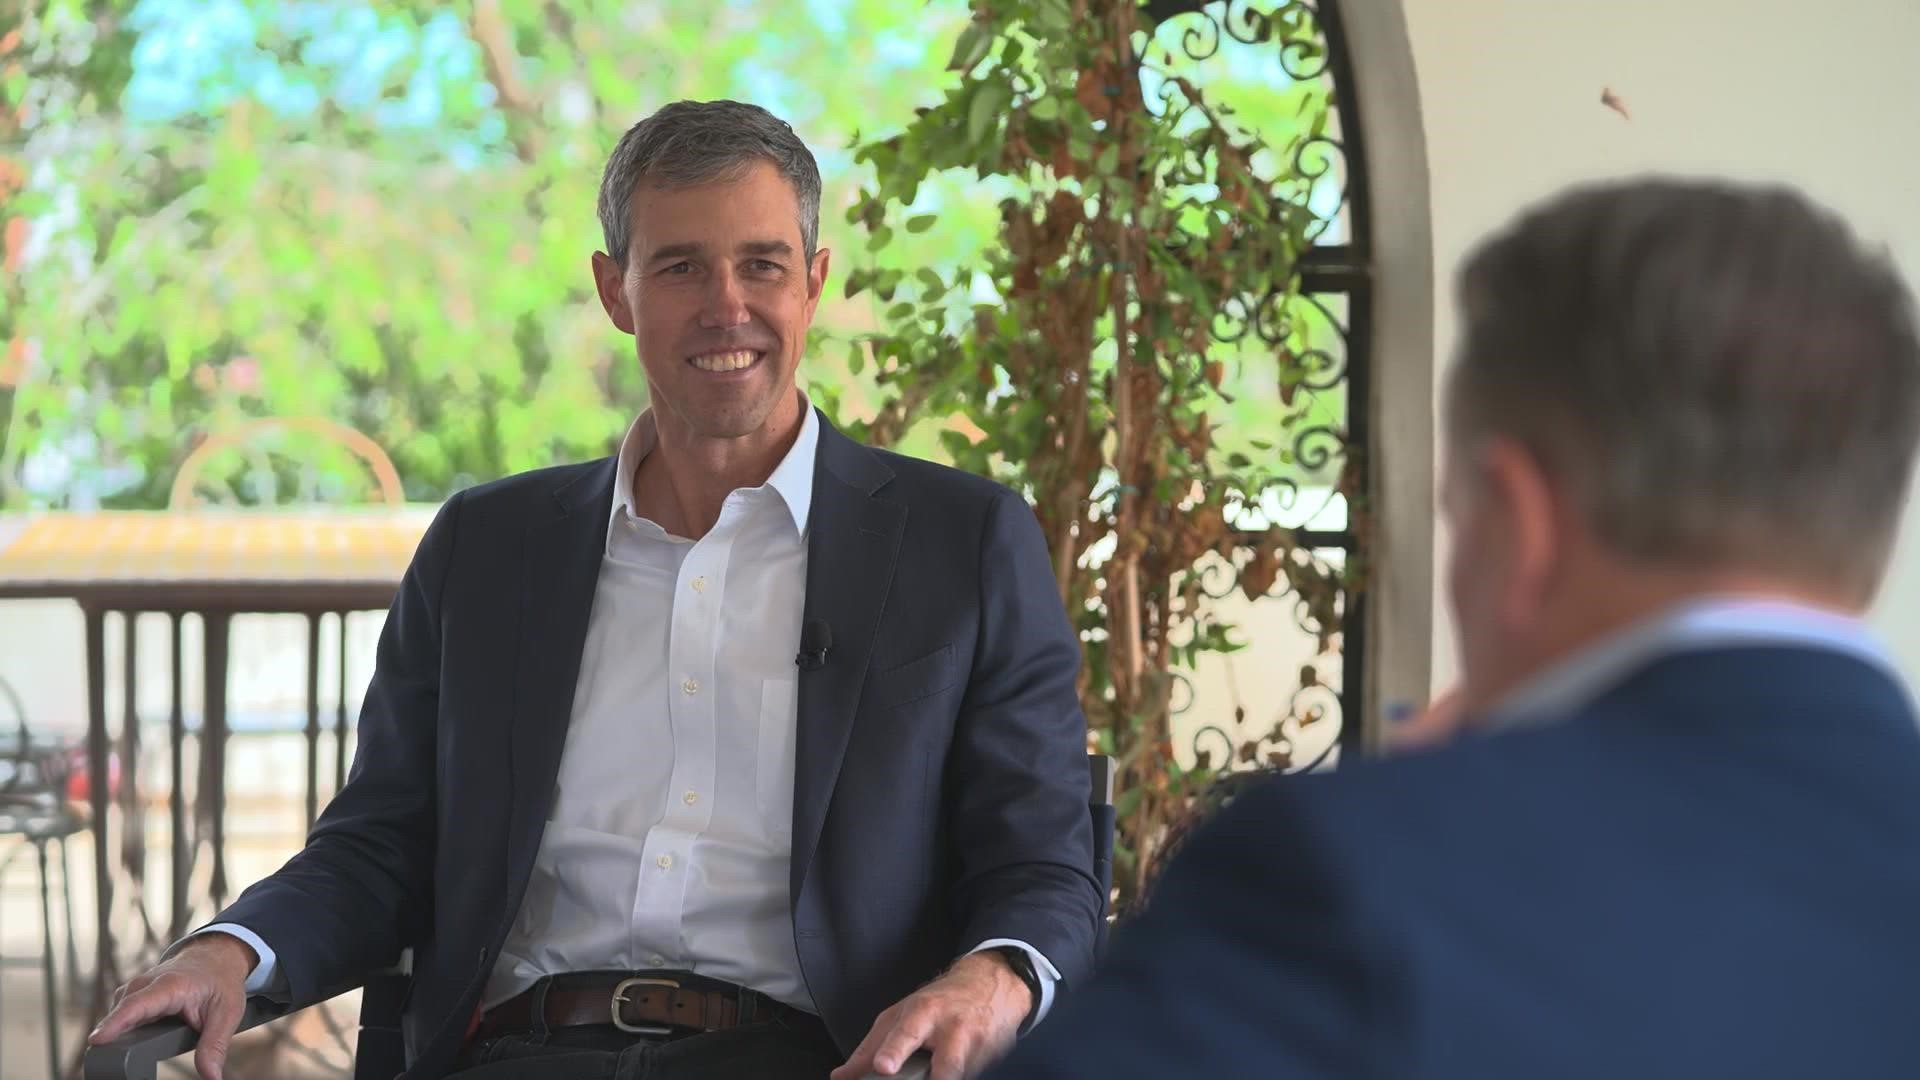 Beto O’Rourke sits down with Jason Whitely to discuss issues ranging from abortion to property taxes, the border to the “Texas Miracle”